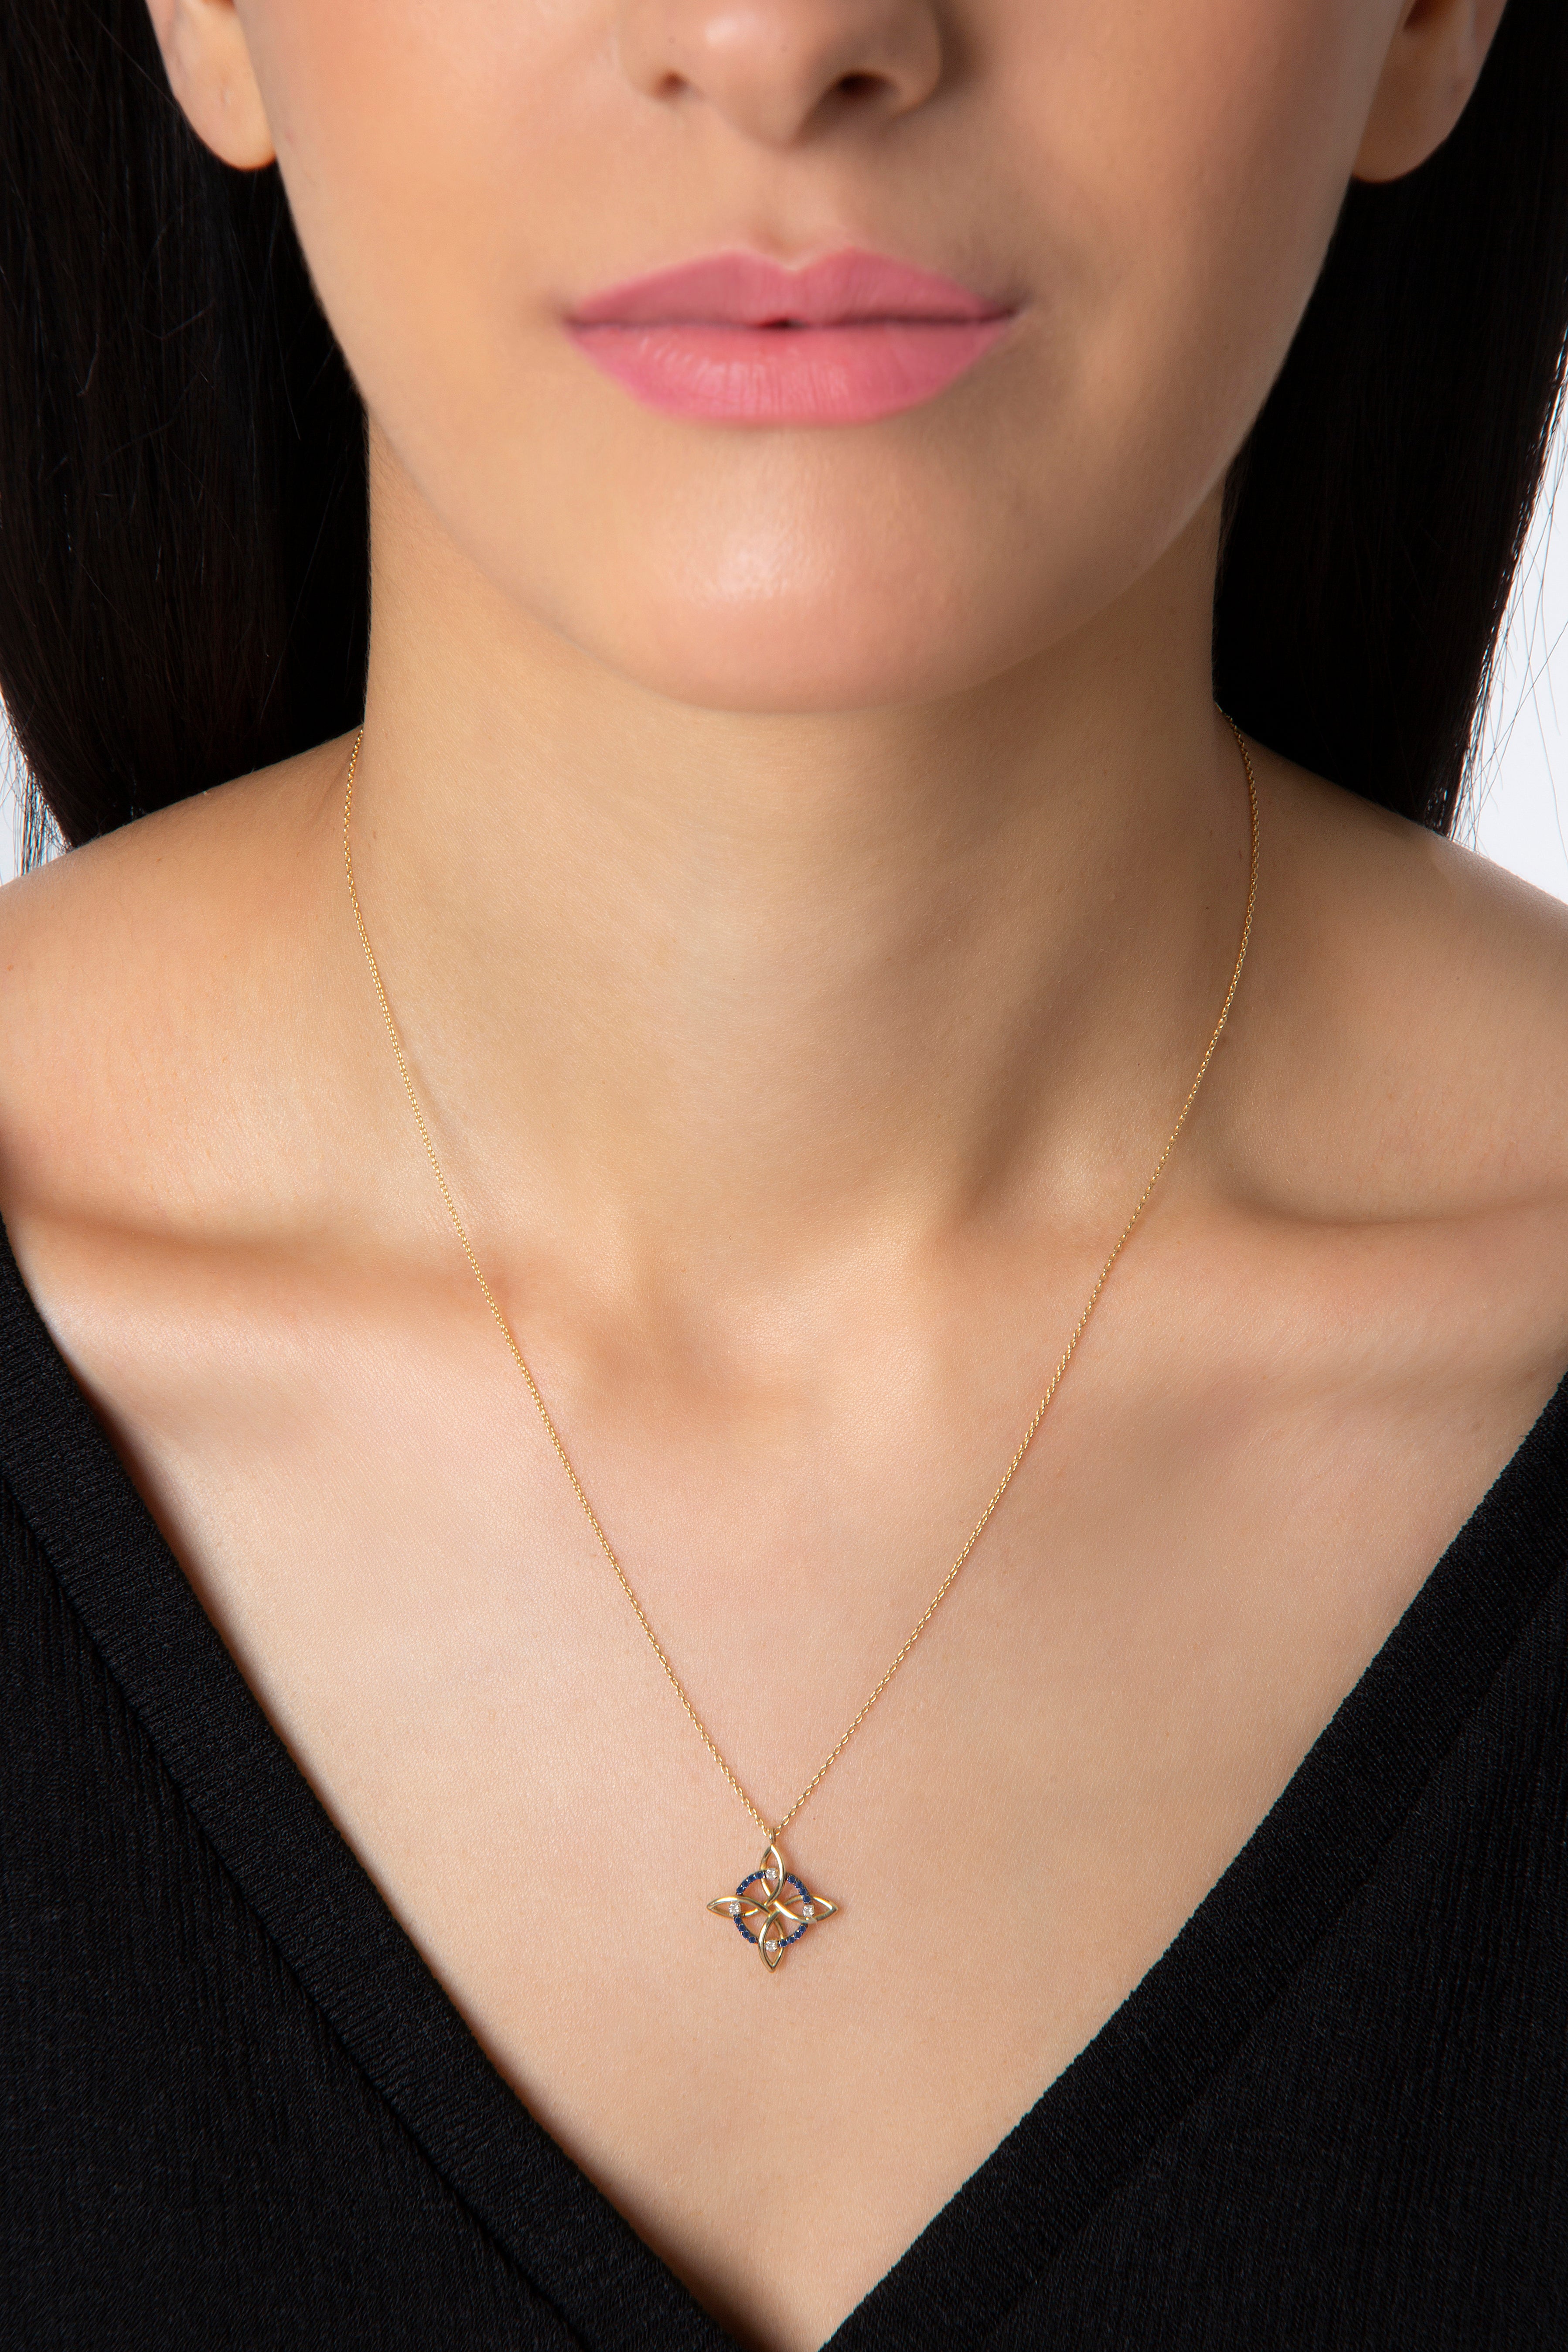 Magic Knot Necklace in Yellow Gold - Her Story Shop